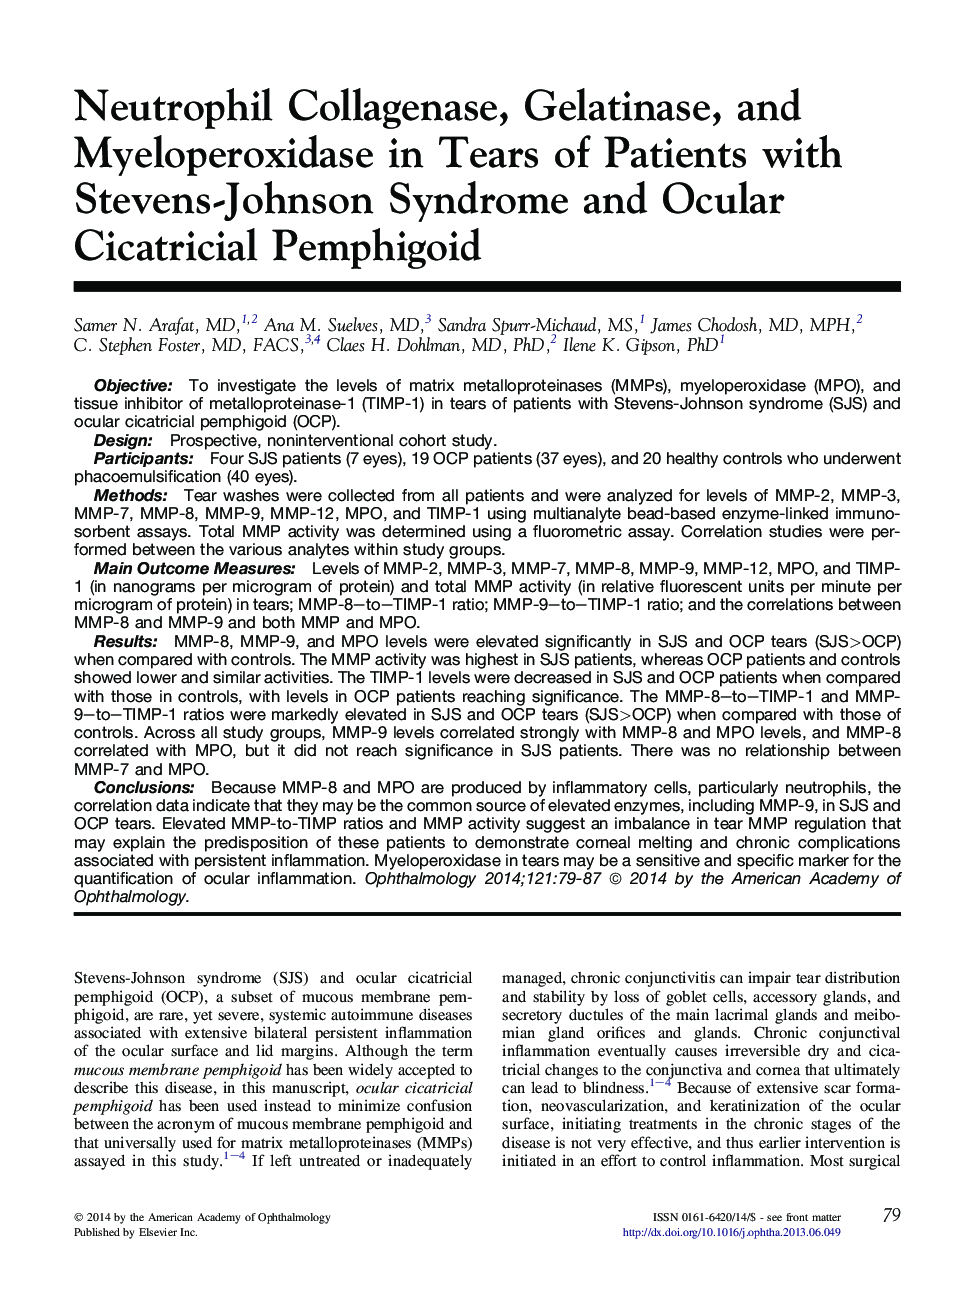 Neutrophil Collagenase, Gelatinase, and Myeloperoxidase in Tears of Patients with Stevens-Johnson Syndrome and Ocular Cicatricial Pemphigoid 